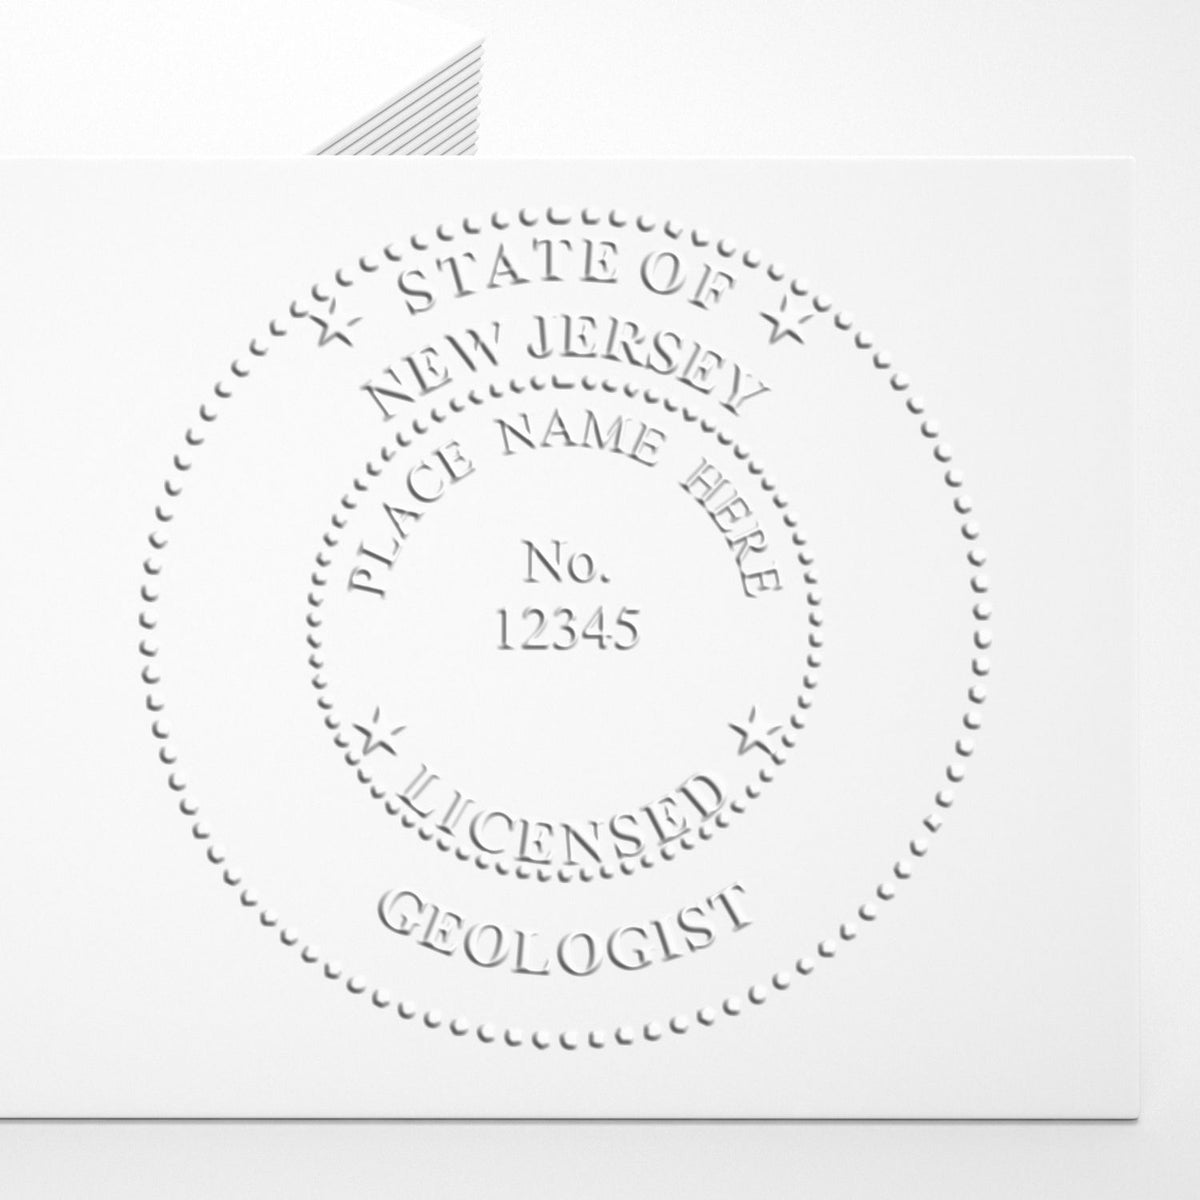 Another Example of a stamped impression of the Handheld New Jersey Professional Geologist Embosser on a office form